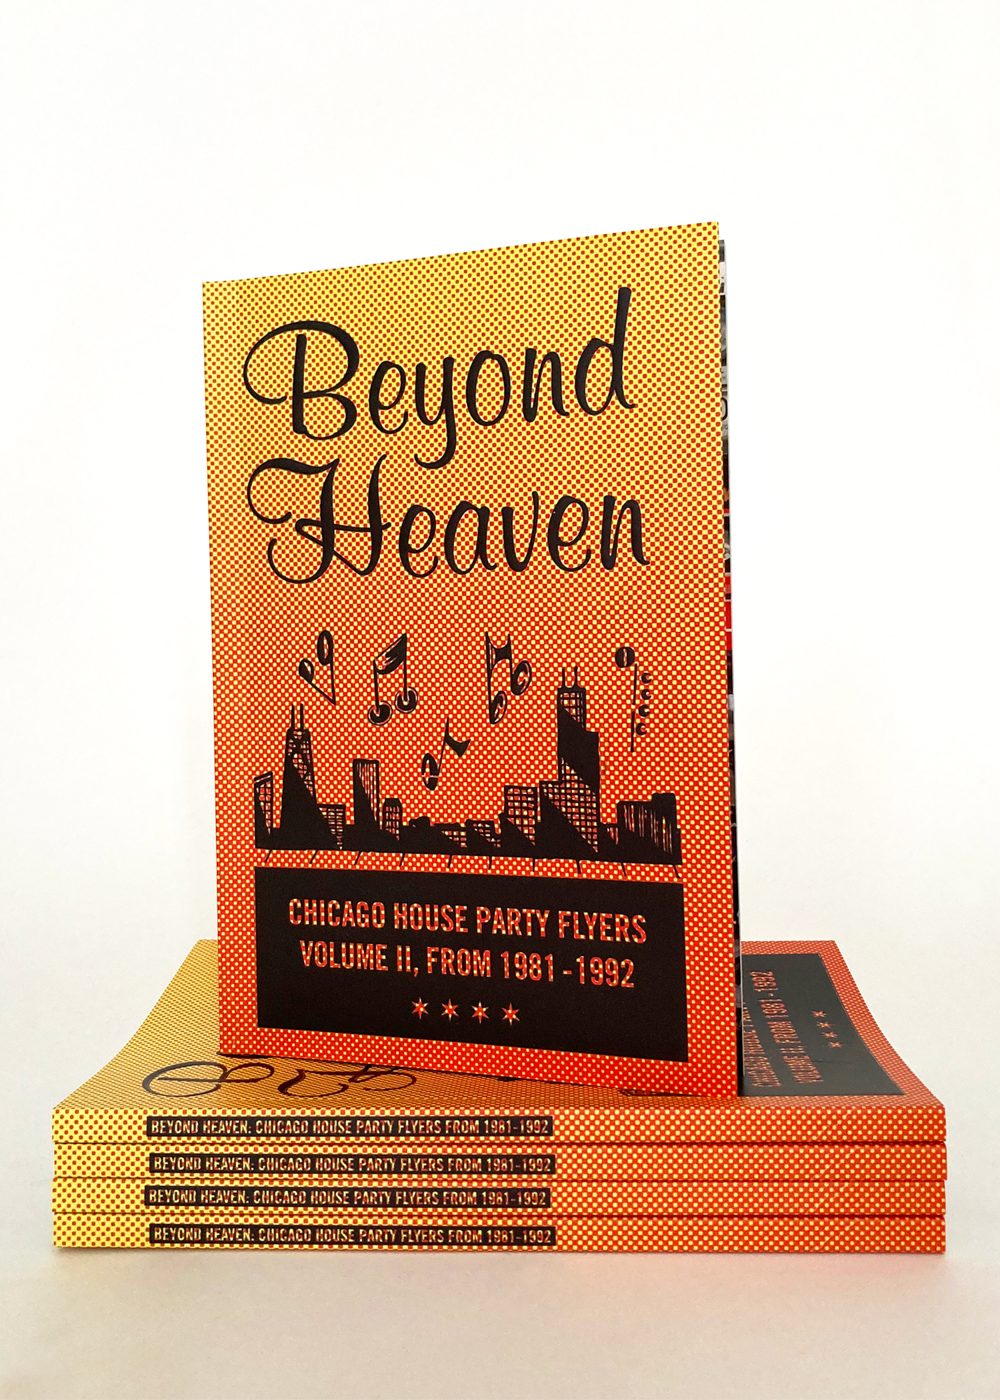 Beyond Heaven: Chicago House Party Flyers Volume II, from 1981-1992